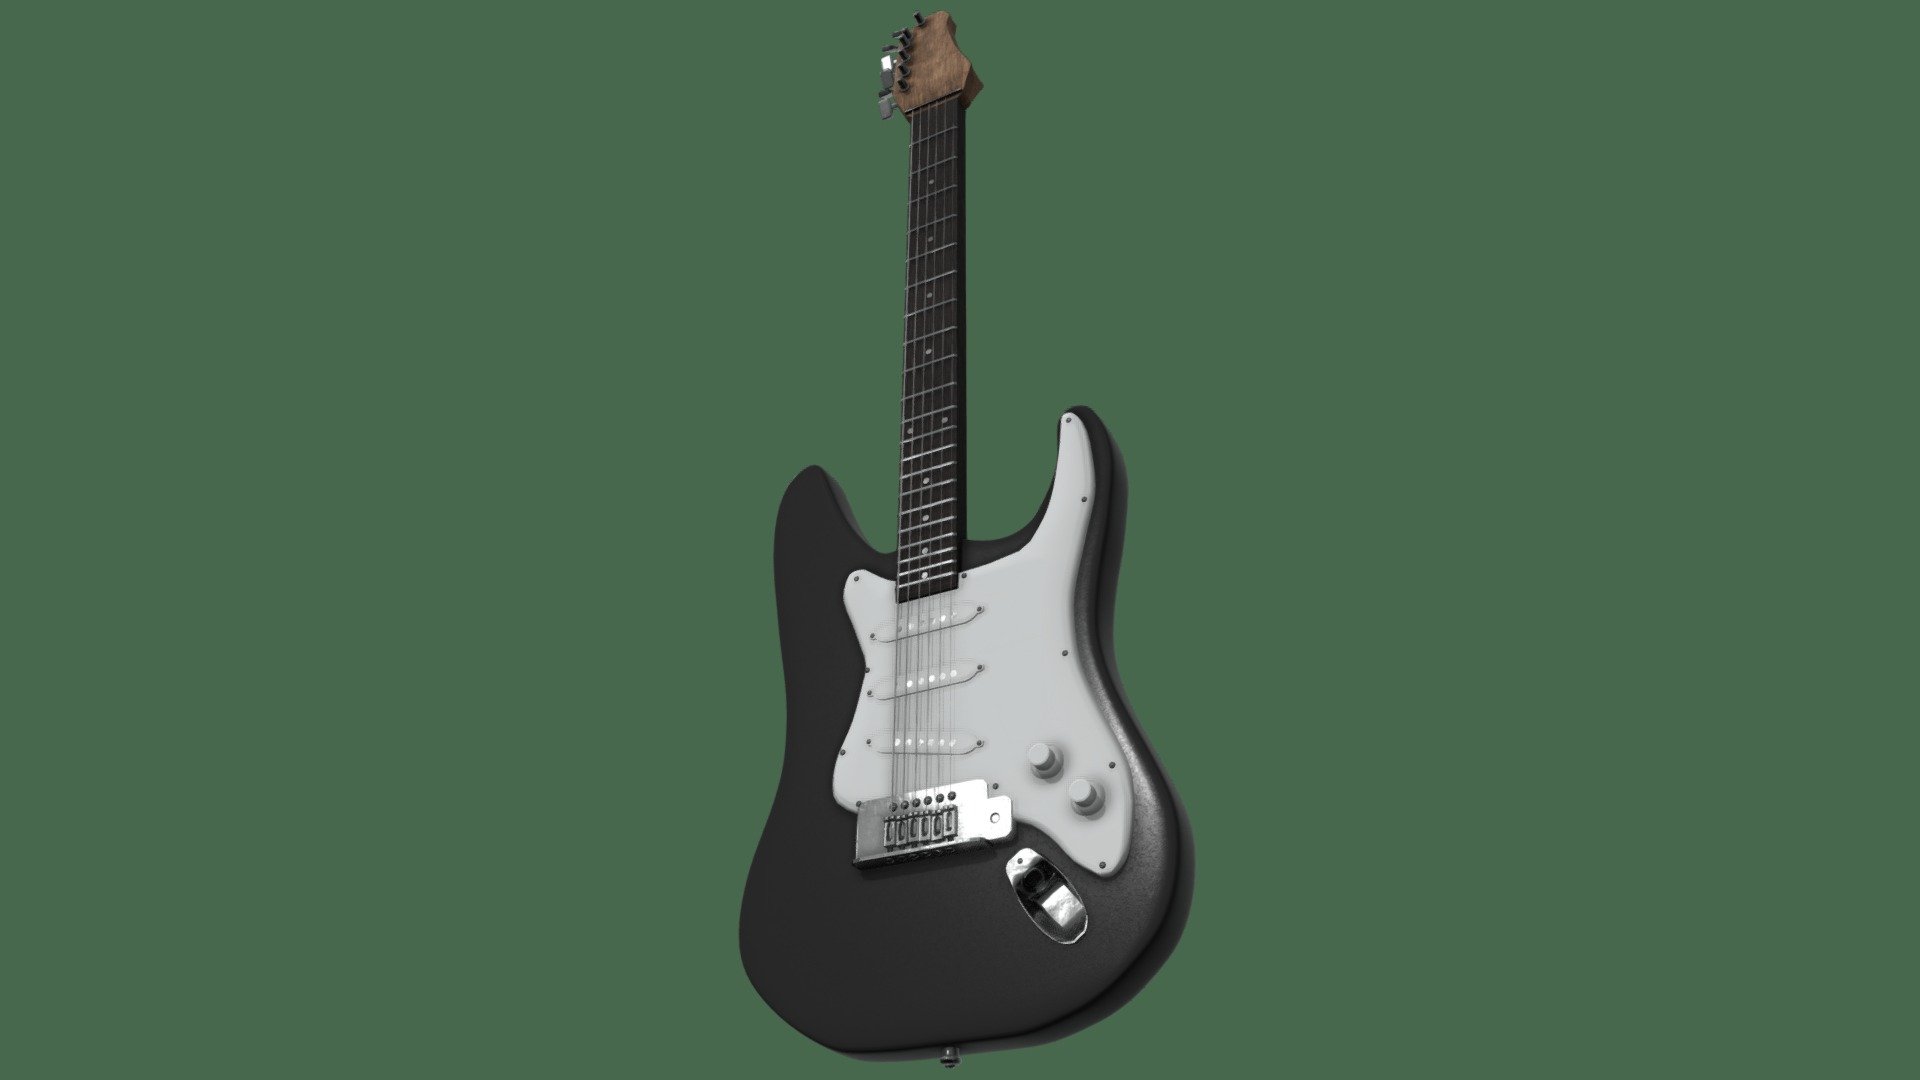 Basic black and white electric guitar modelled in Maya and textured in Substance painter. Improved topology makes it easier to apply own textures to as well and makes textures flow more seamlessly 3d model